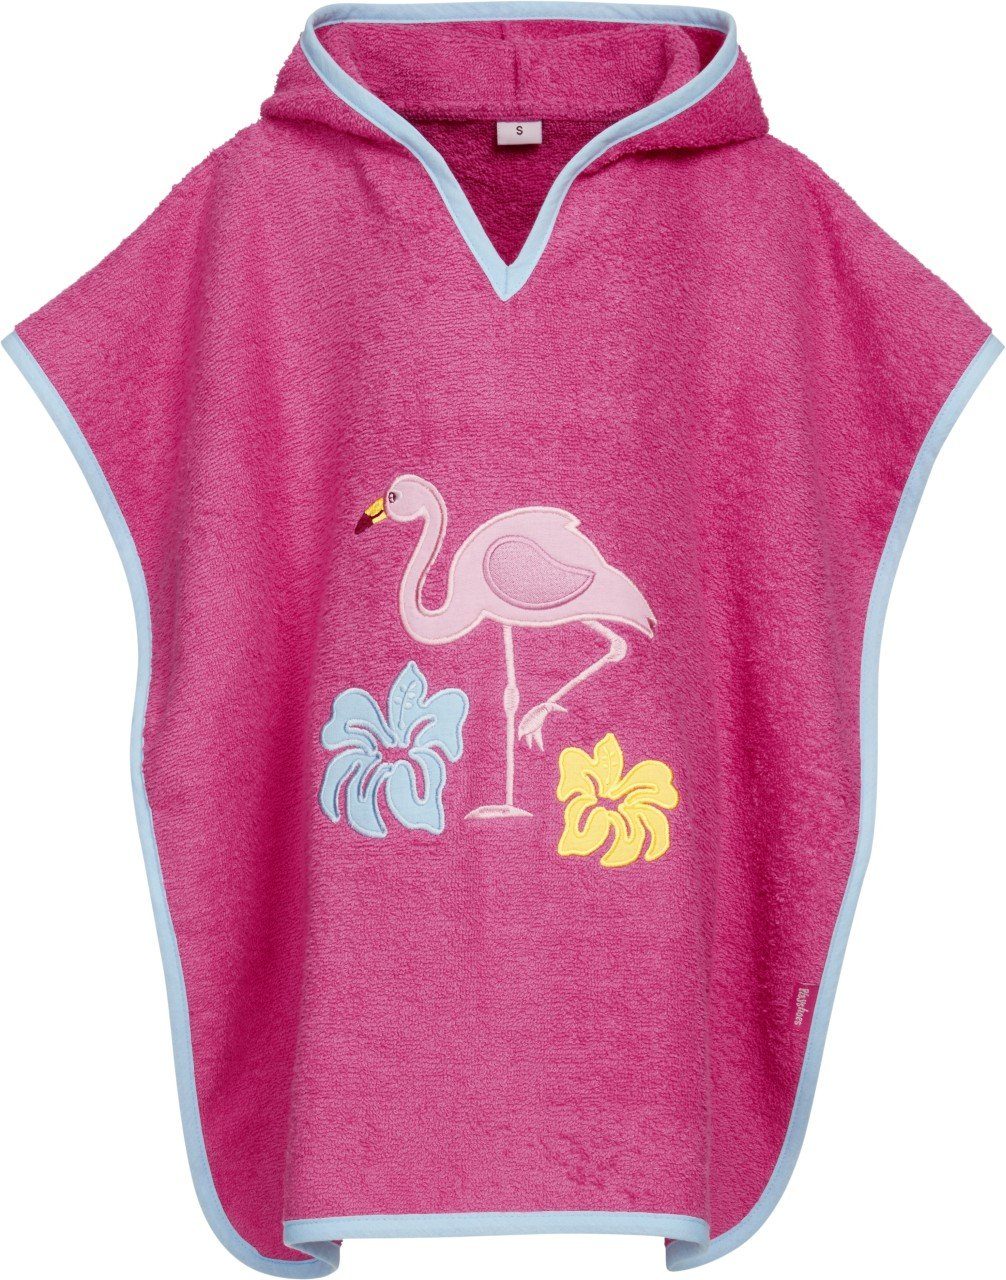 Playshoes Badeponcho Flamingo Frottee-Poncho